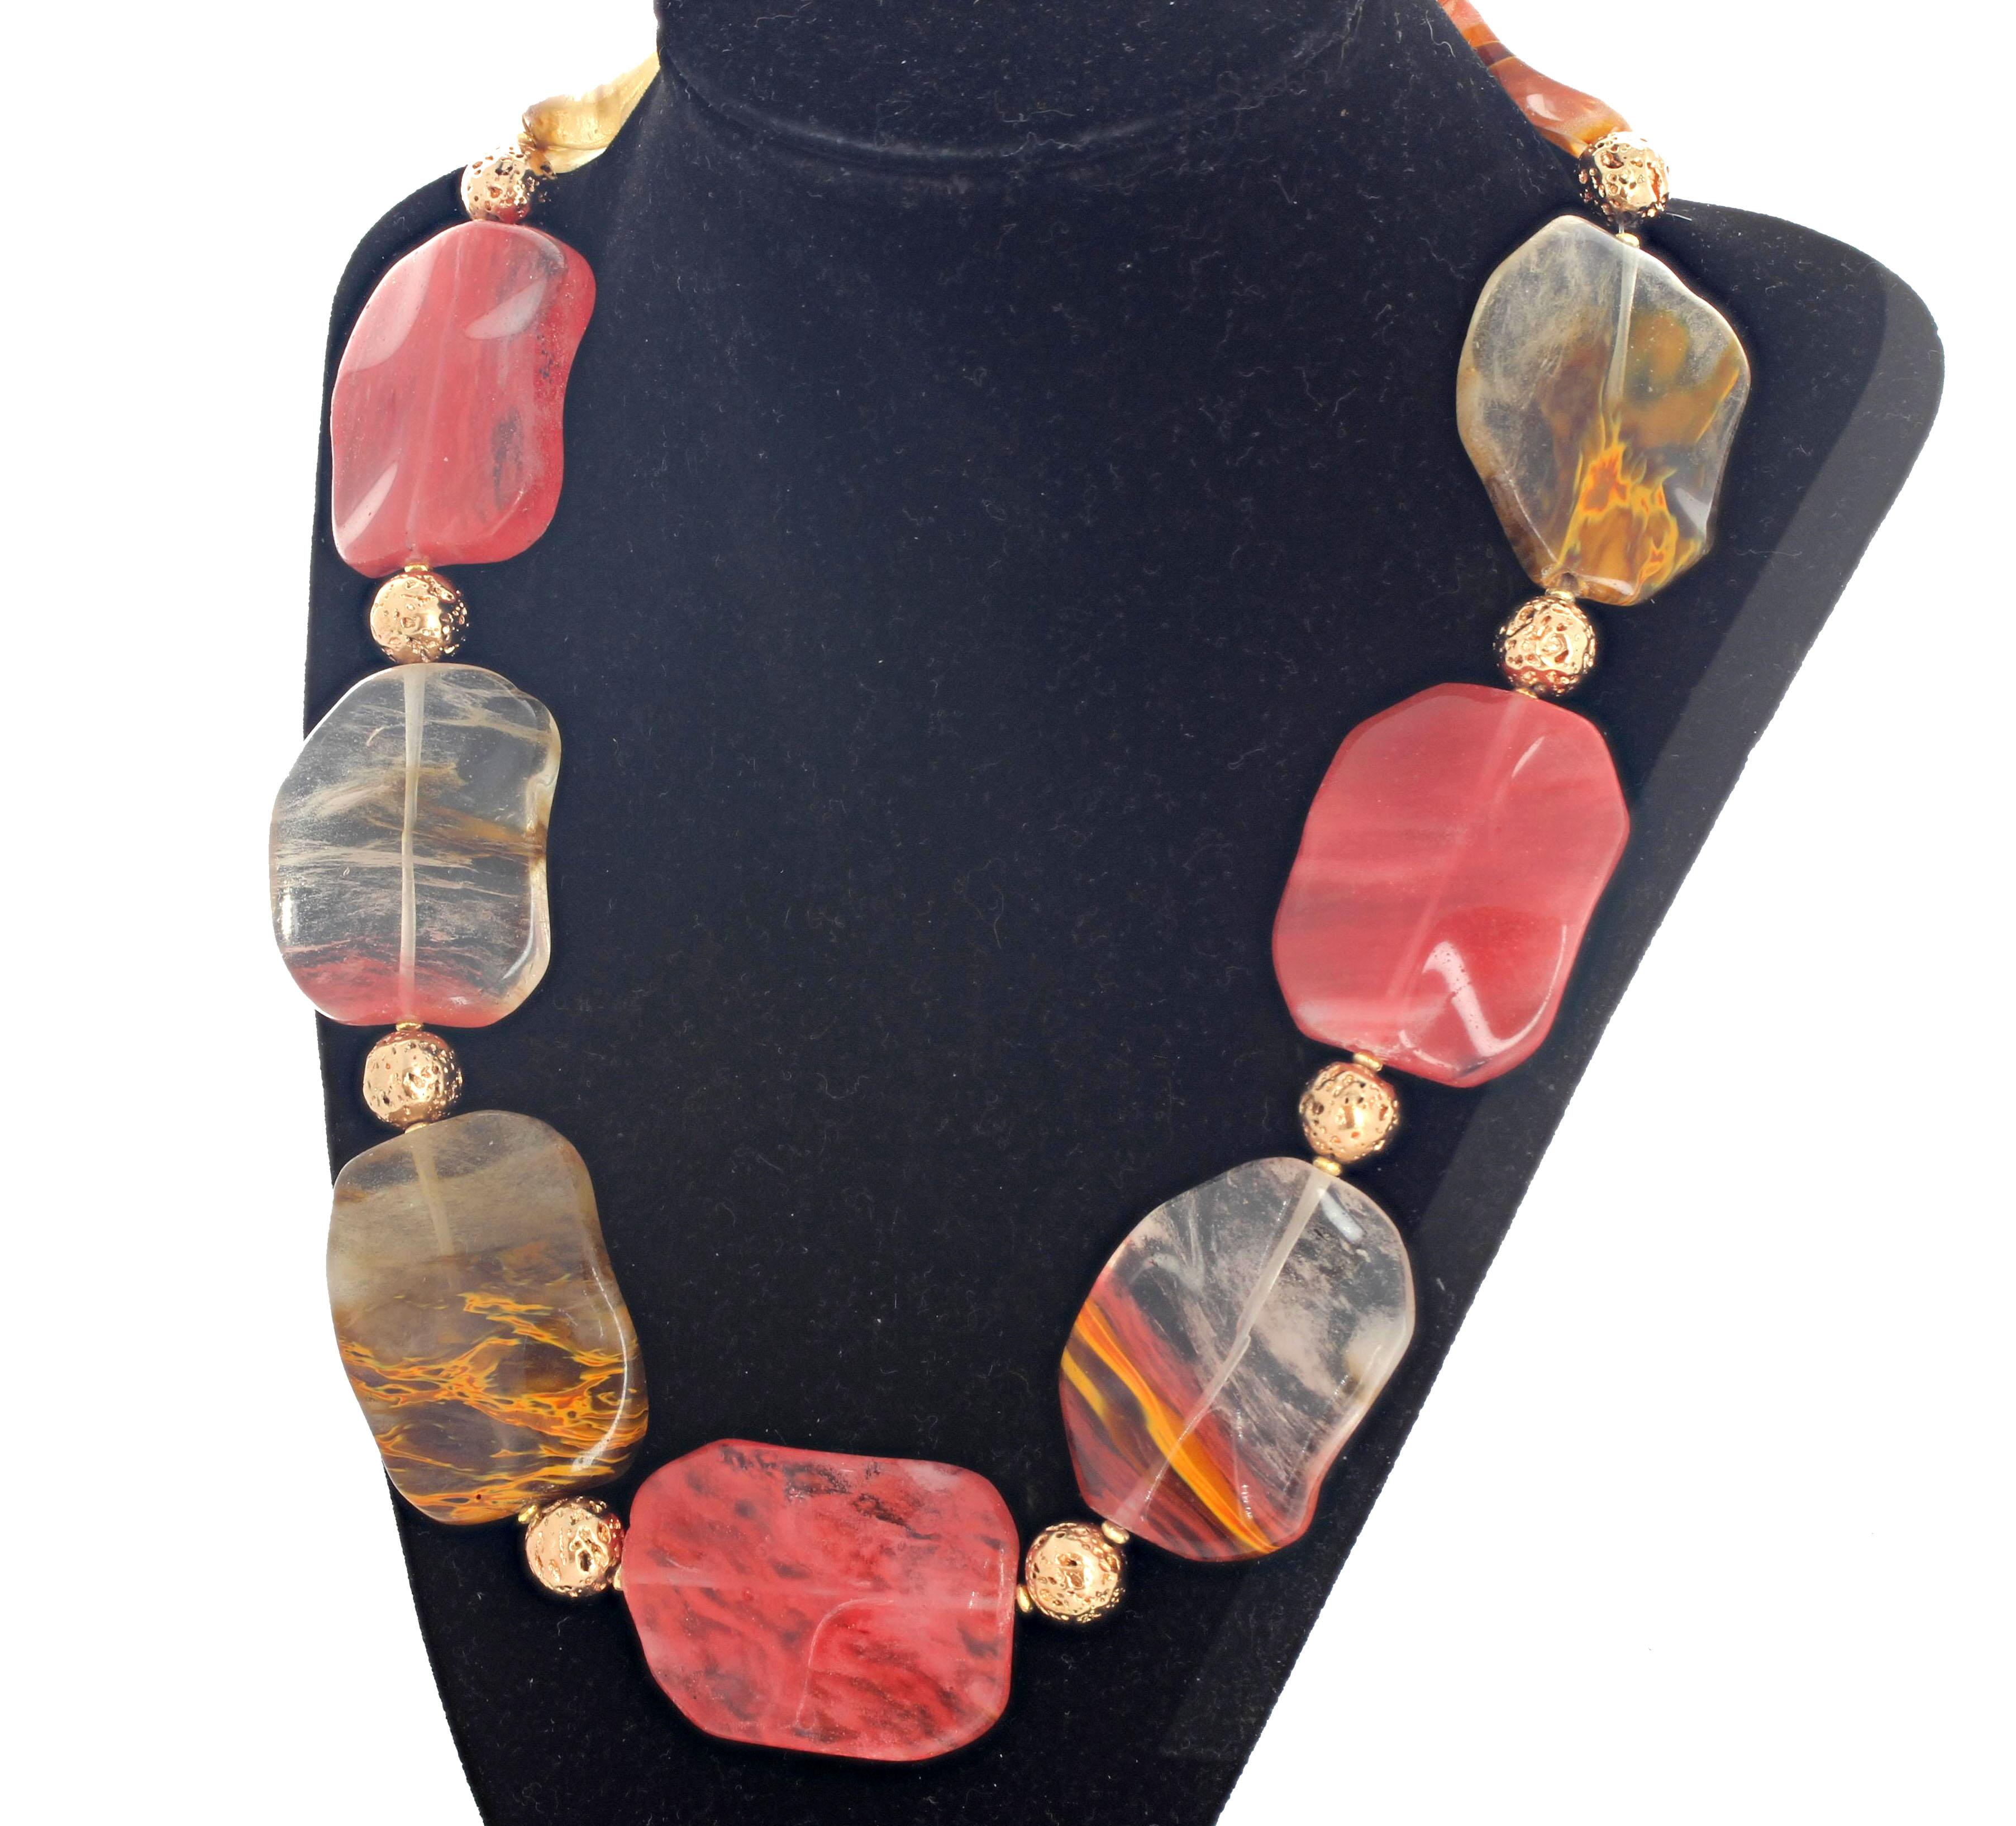 Highly polished glowing translucent wavy natural 40mm x 30mm Rutilated Quartz enhanced with round natural gold plated lava nuggets set in this beautiful 20.5 inch long necklace with gold plated easy to use hook clasp.  This is truly artistically